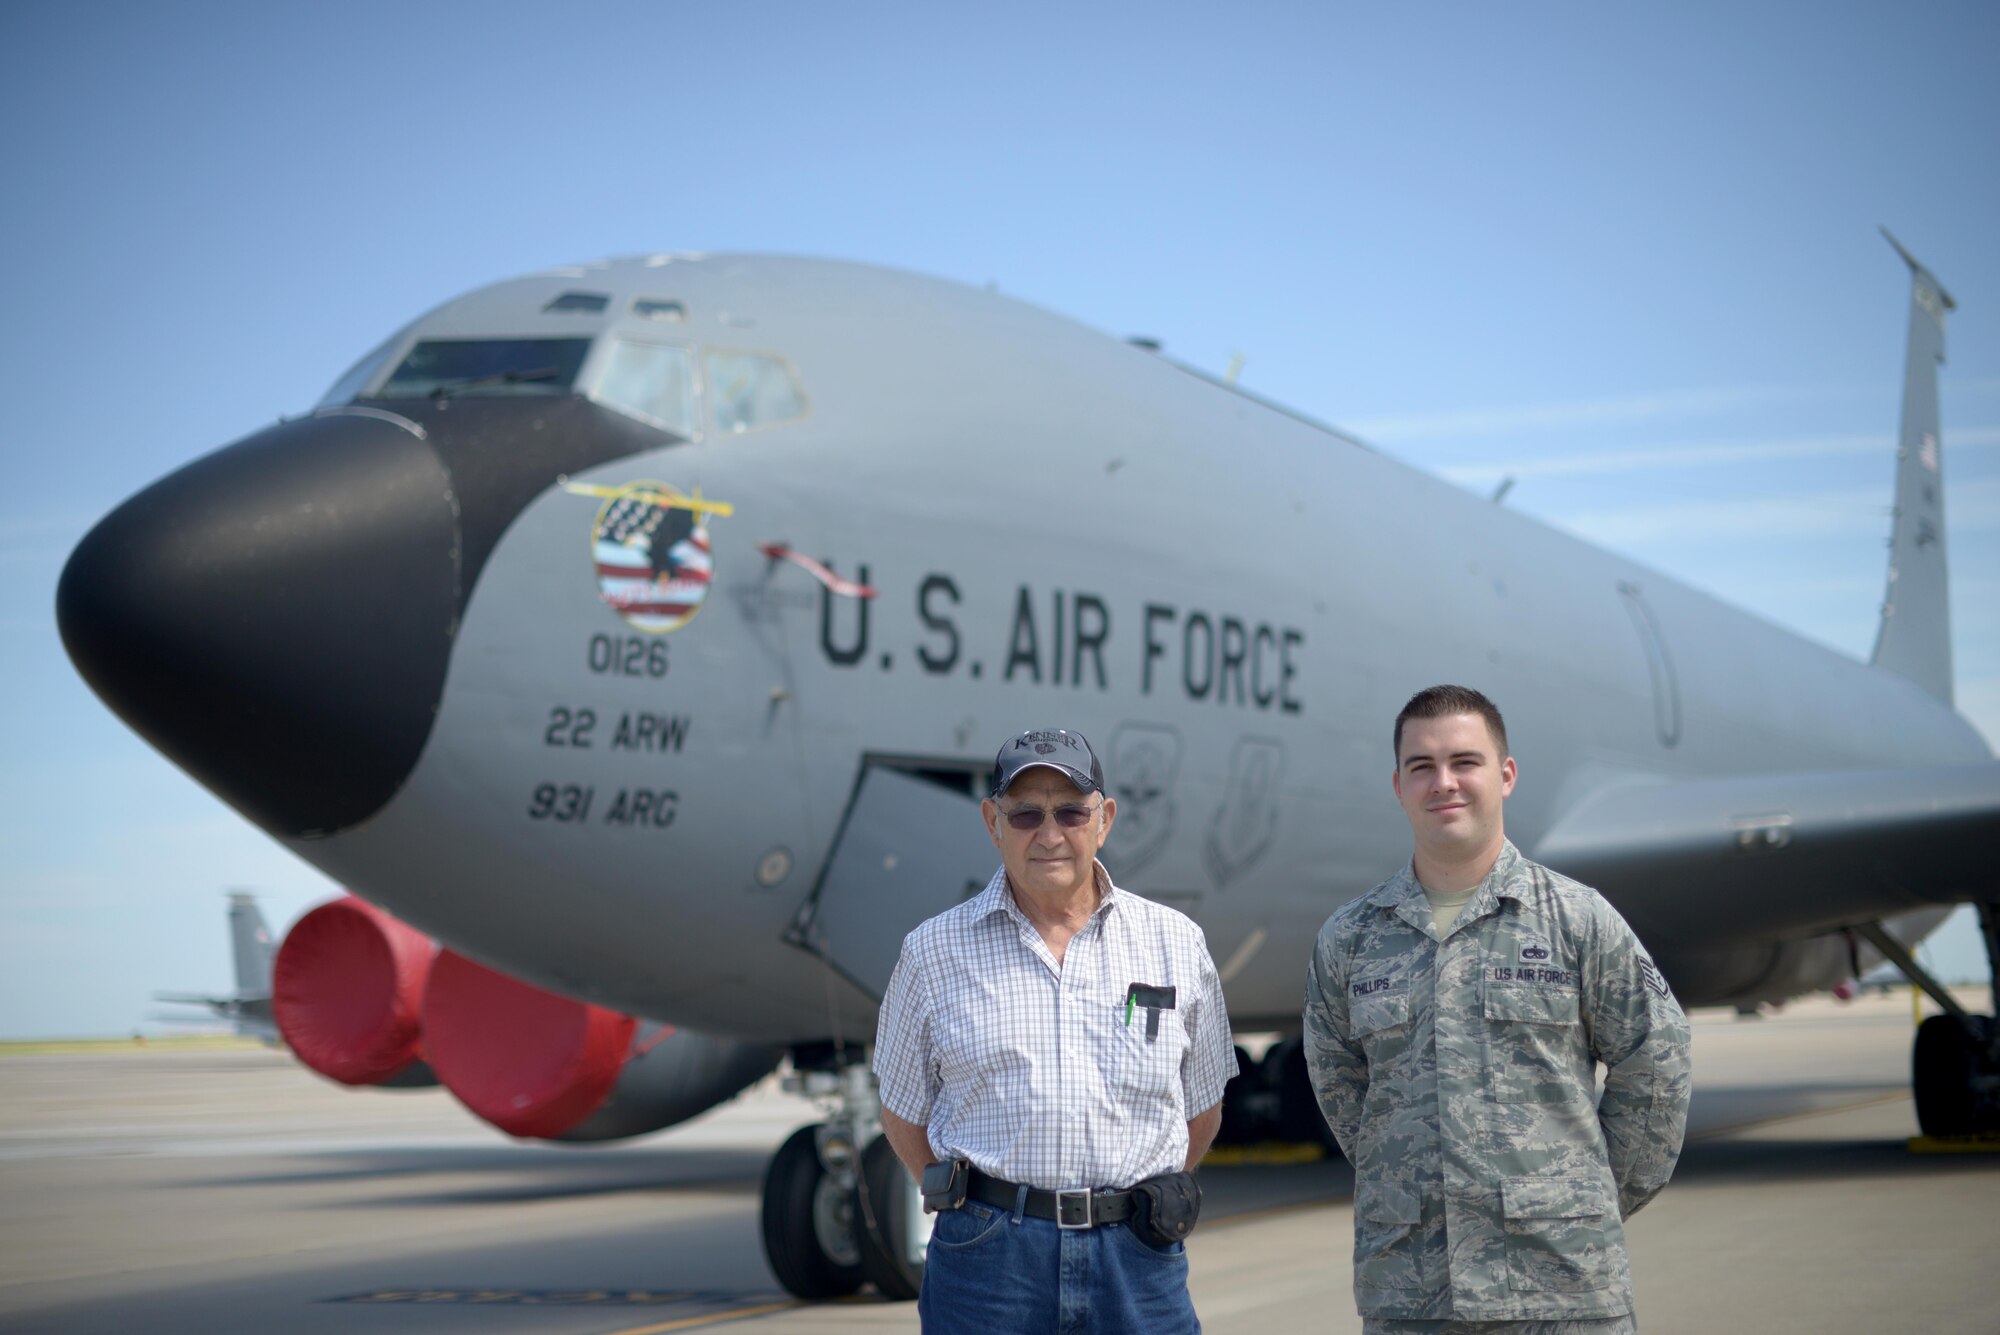 Staff Sgt. Austin Phillips, the 22nd Maintenance Squadron wheel and tire section chief poses with his grandfather, retired Staff Sgt. Raymond Hopper, in front of a KC-135 Stratotanker June 25, 2016, at McConnell Air Force Base, Kan. Phillips is assigned to the KC-135, the same aircraft his grandfather once worked on nearly 60 years before. (U.S. Air Force photo/Airman 1st Class Christopher Thornbury)